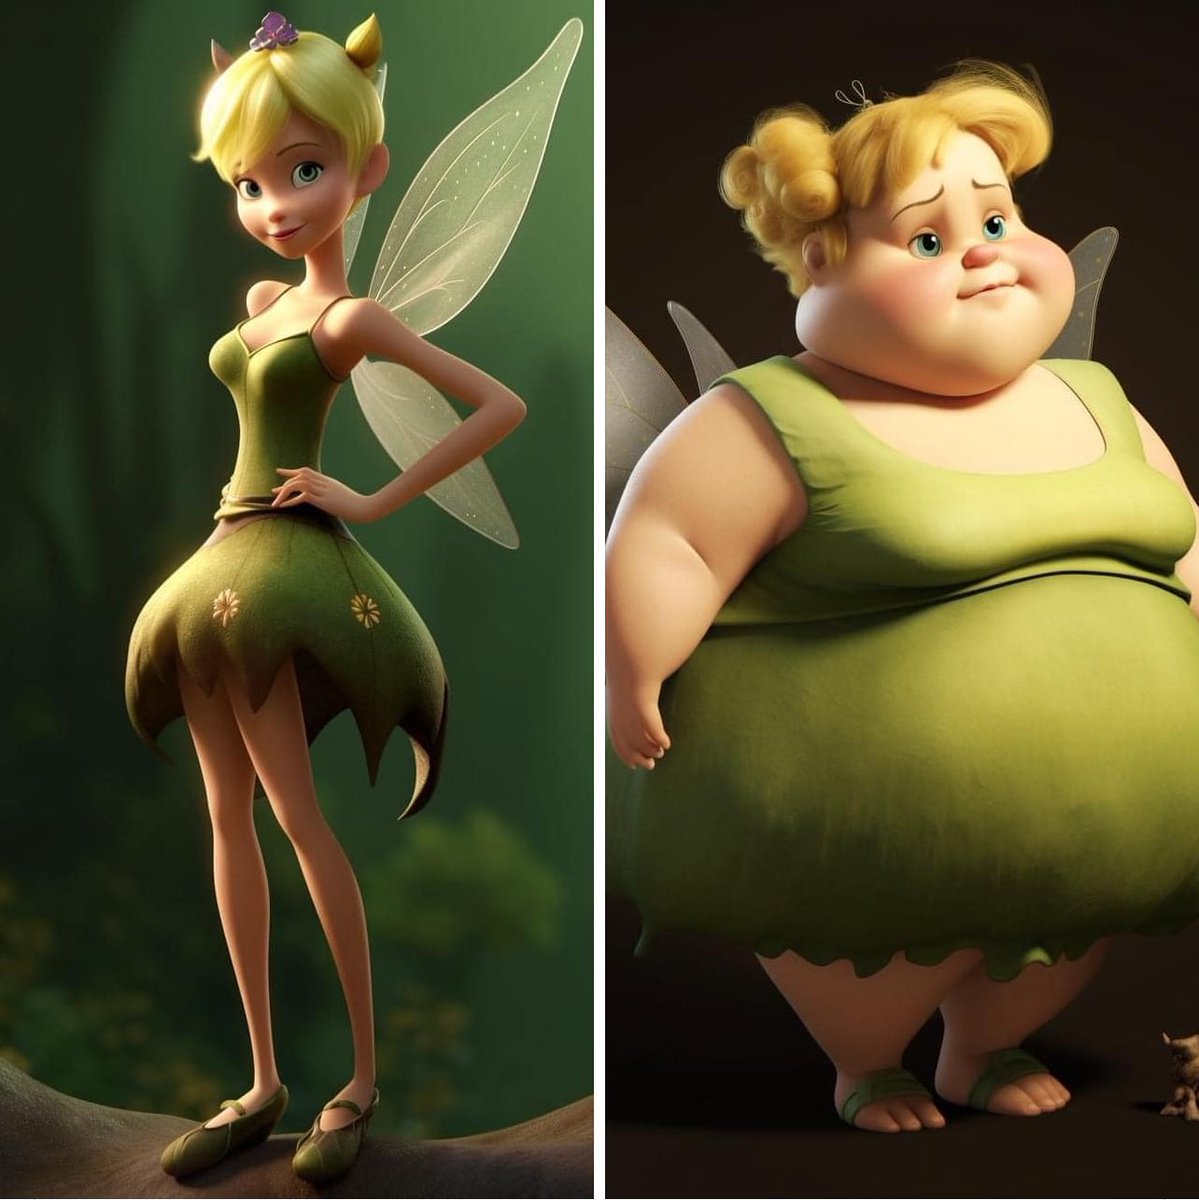 Tinkerbell and her cousin Tacobell